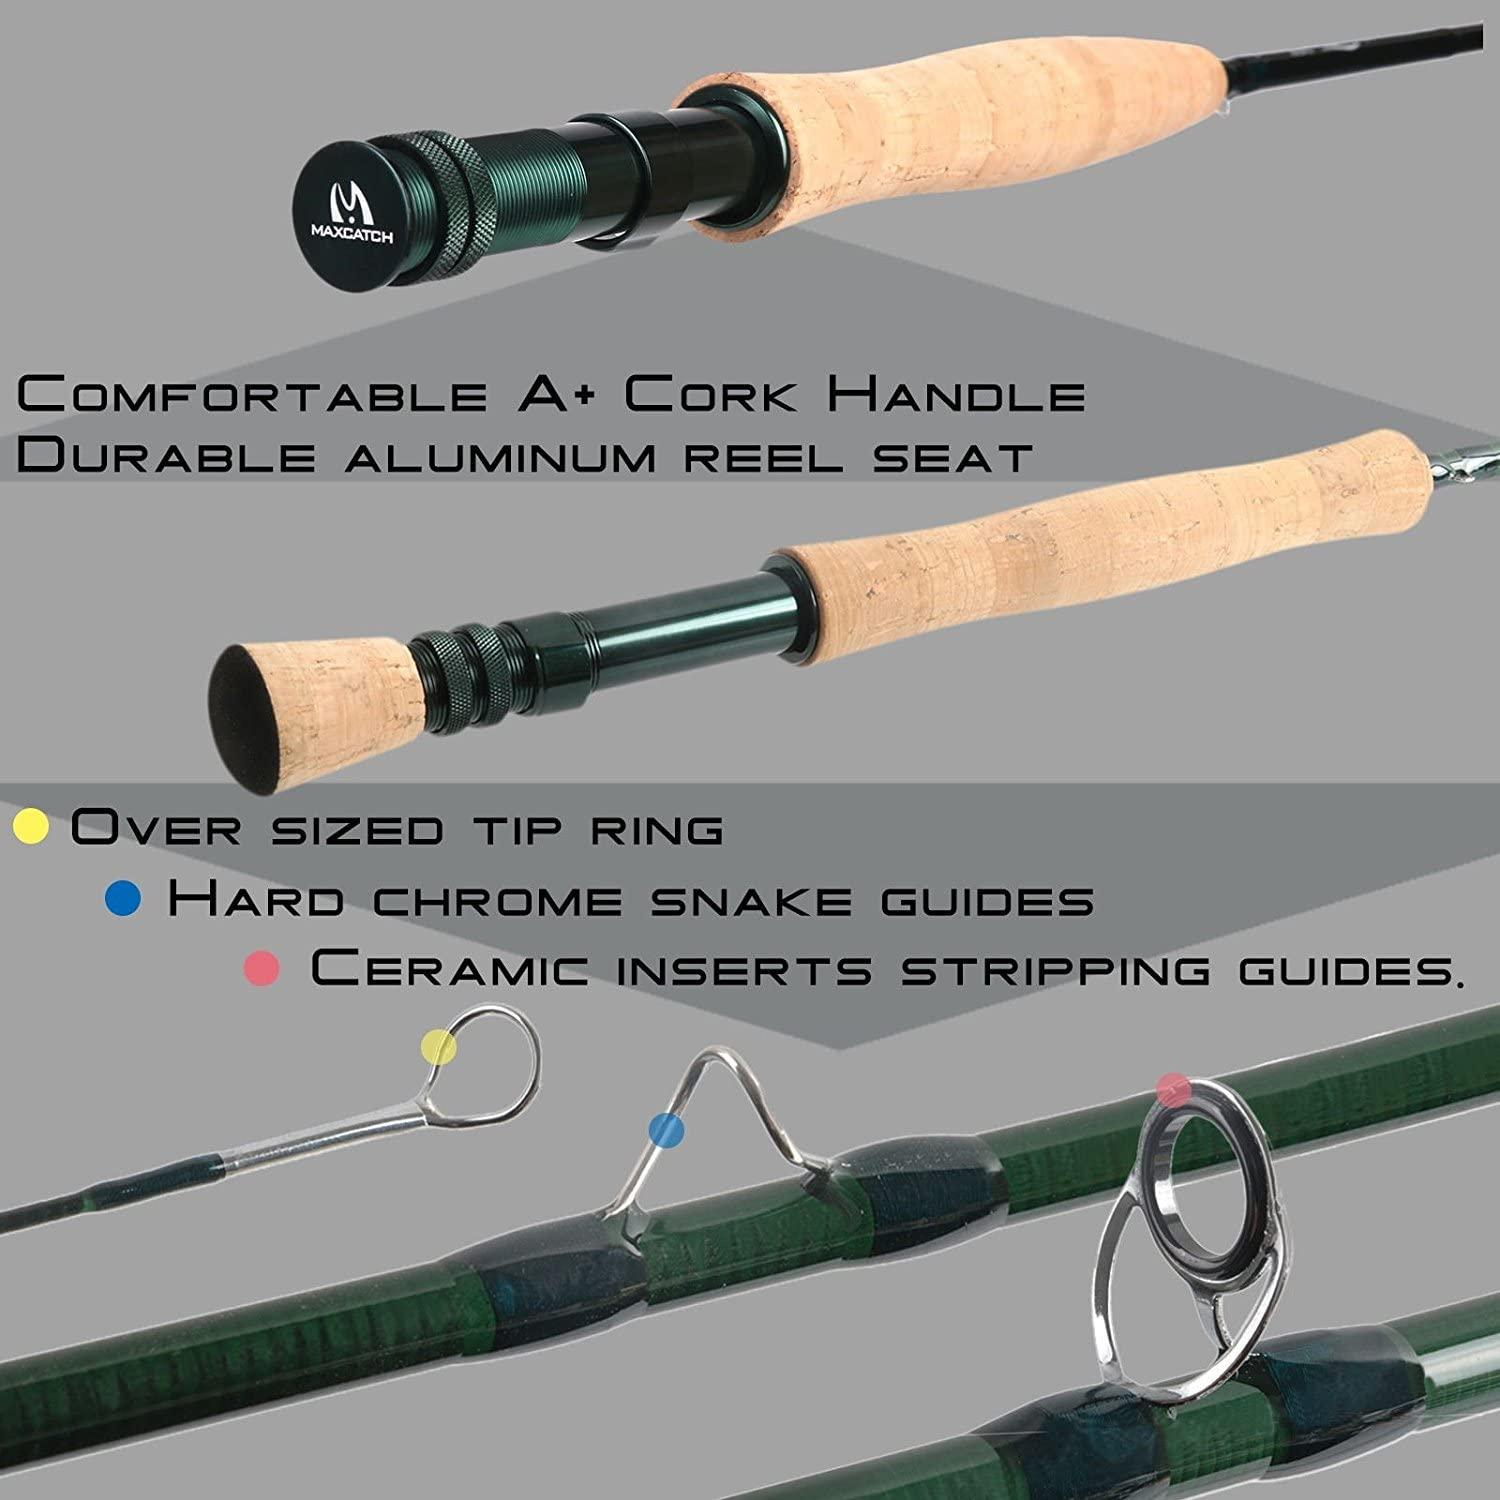 M MAXIMUMCATCH Maxcatch Extreme Fly Fishing Combo Kit 3/5/6/8 Weight,  Starter Fly Rod and Reel Outfit, with a Protective Travel Case 5wt 90 4pc  Rod,5/6 Reel